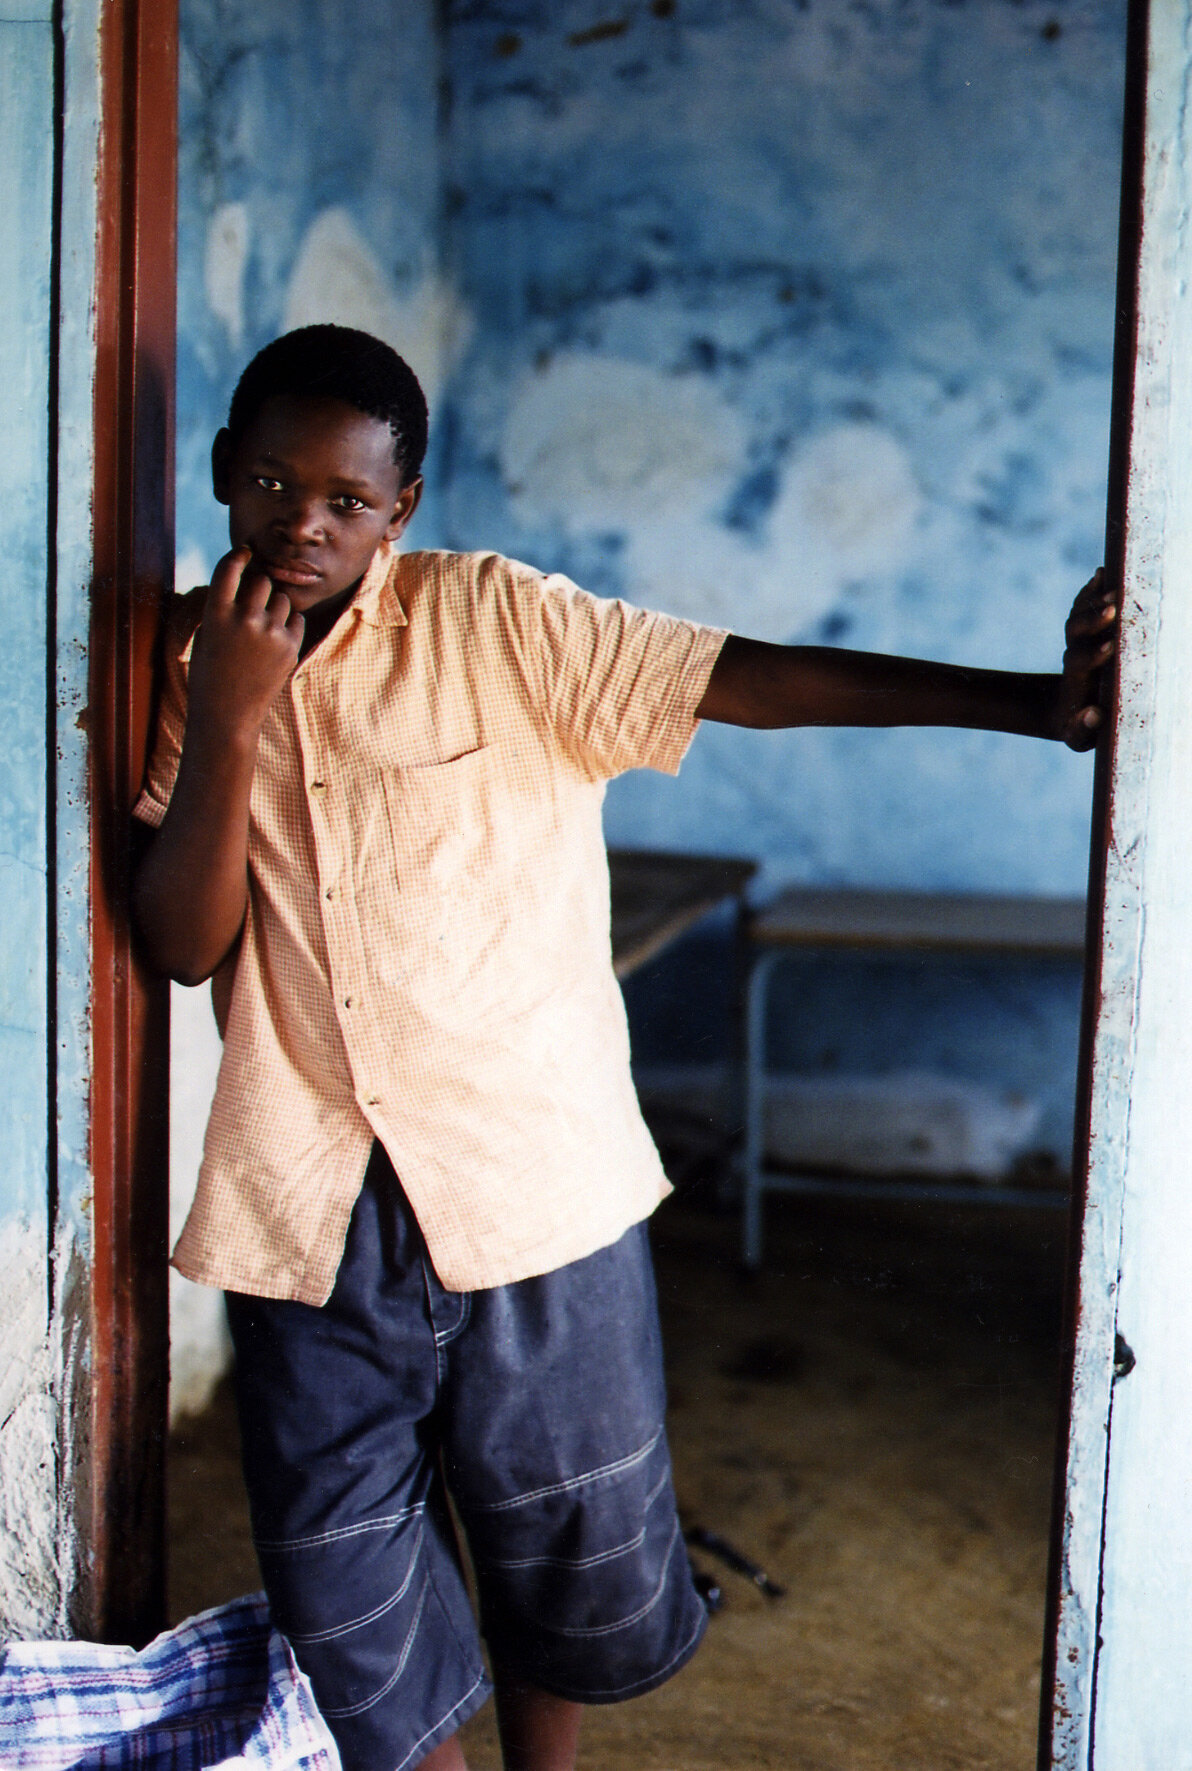 A portrait of a South African boy leaning in a  doorway with blank stare - Editorial photo